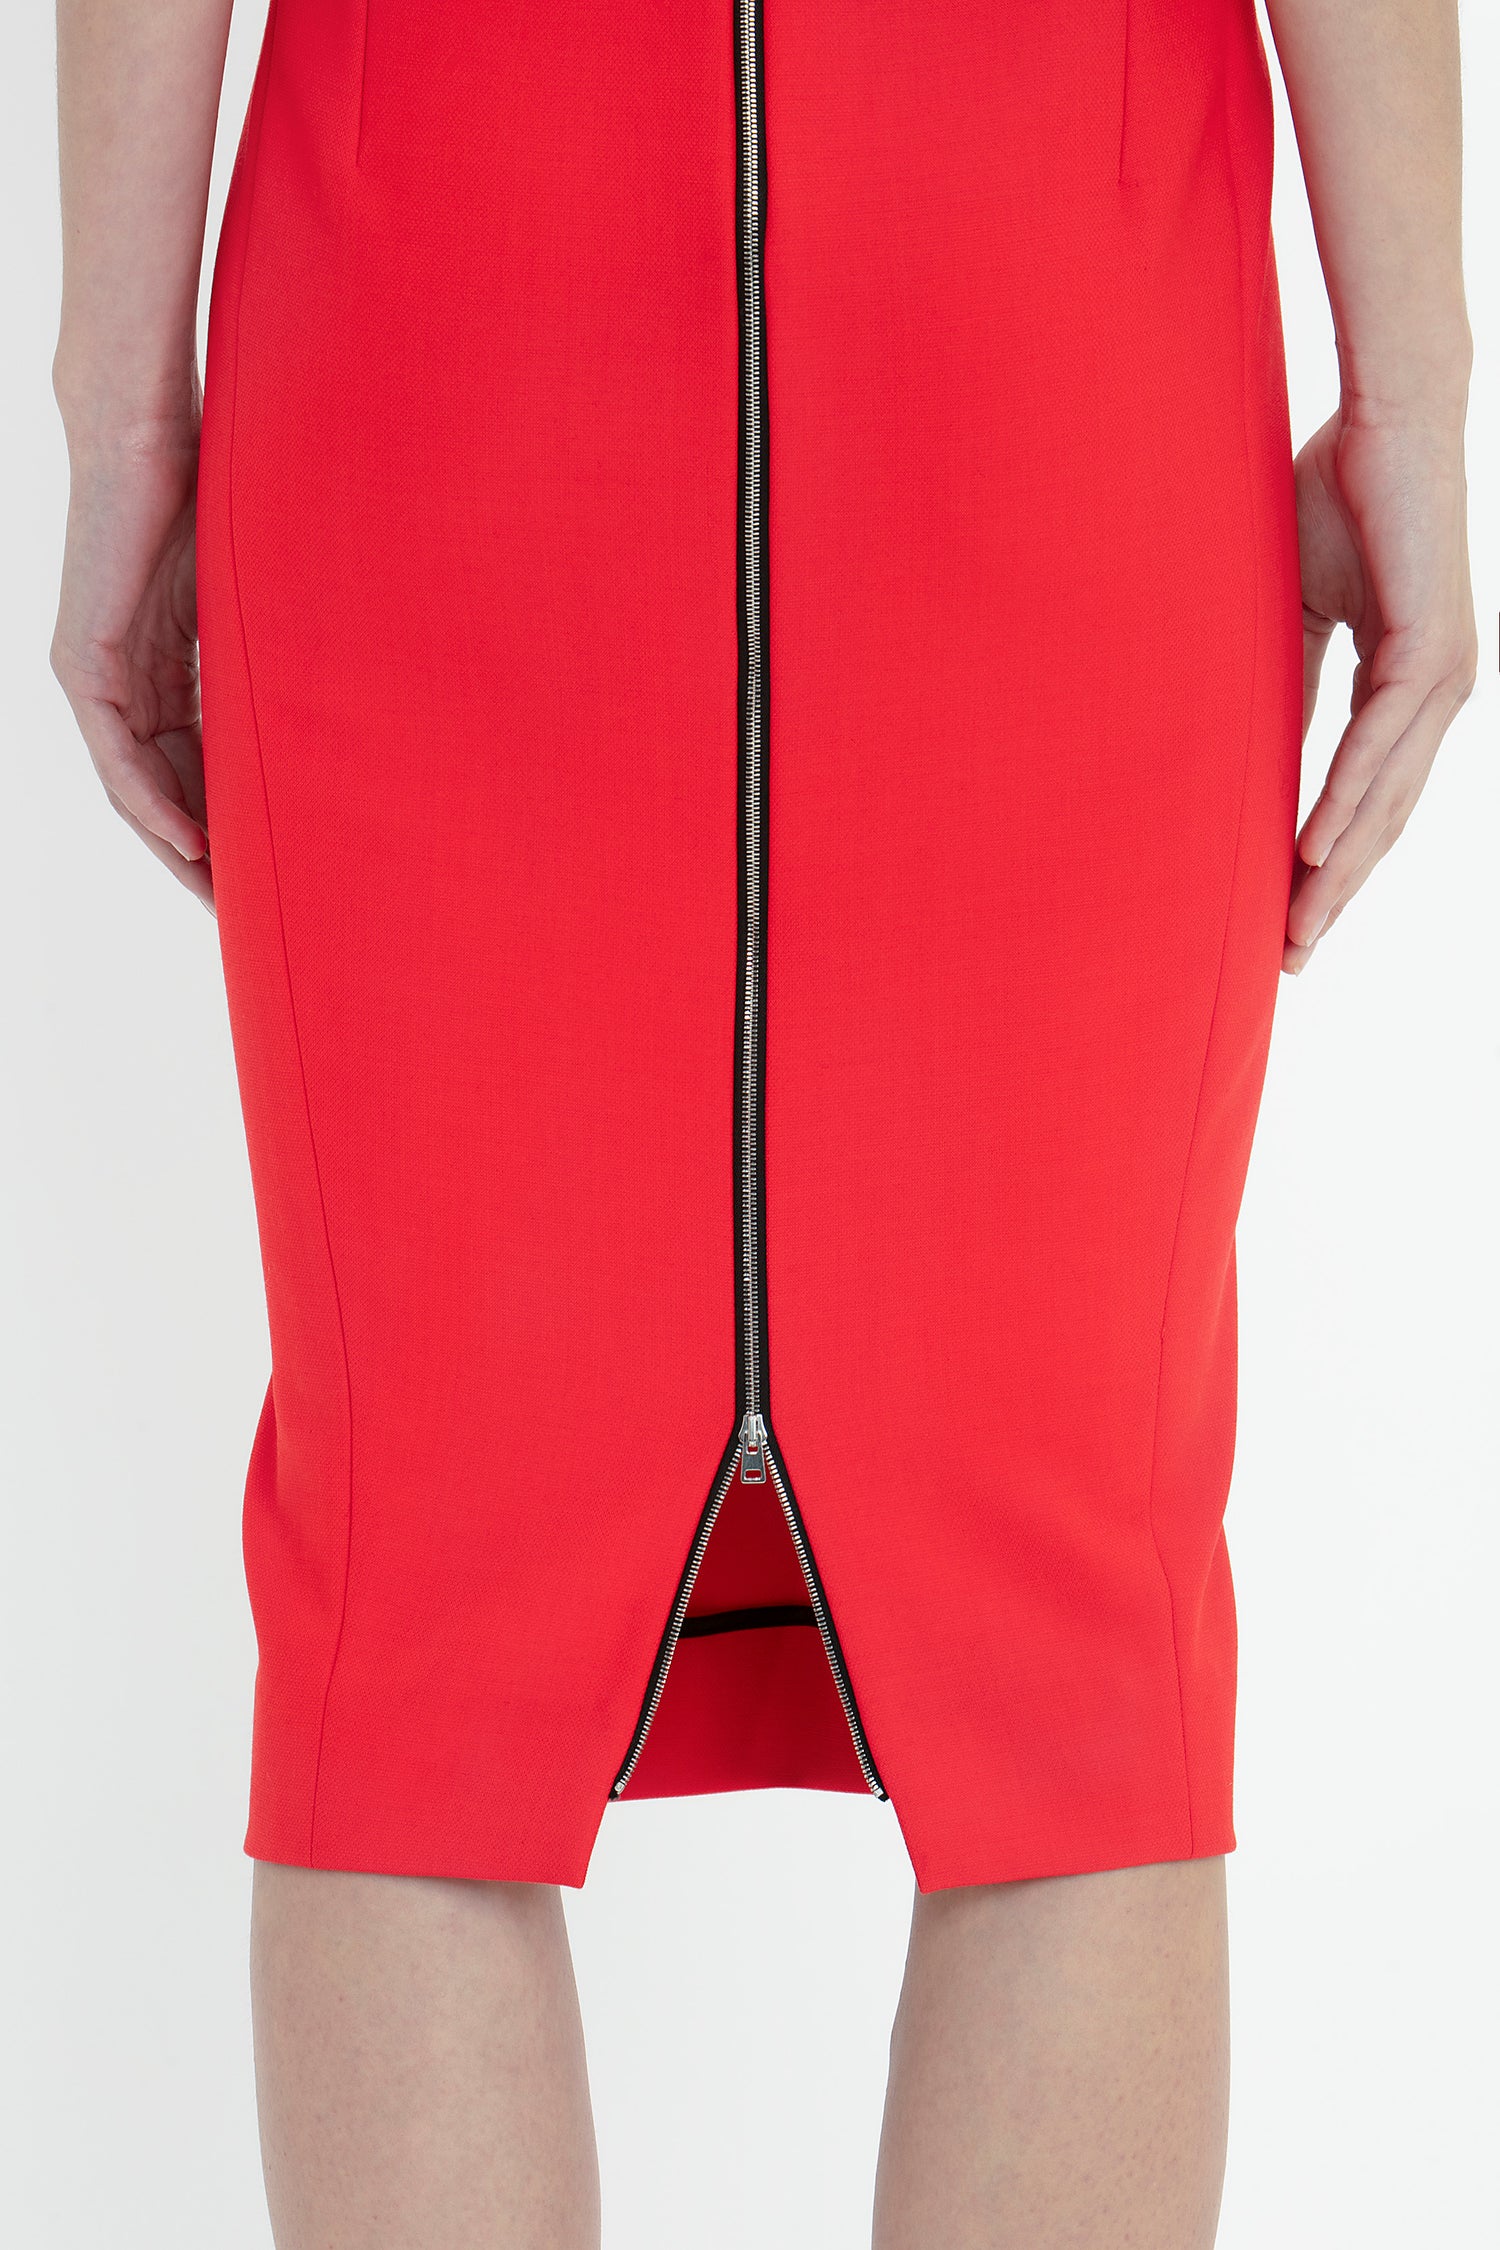 A person wearing a Victoria Beckham Sleeveless Fitted T-Shirt Dress In Bright Red with a visible back zipper stands with arms at their sides, showing the lower half of the dress from behind.